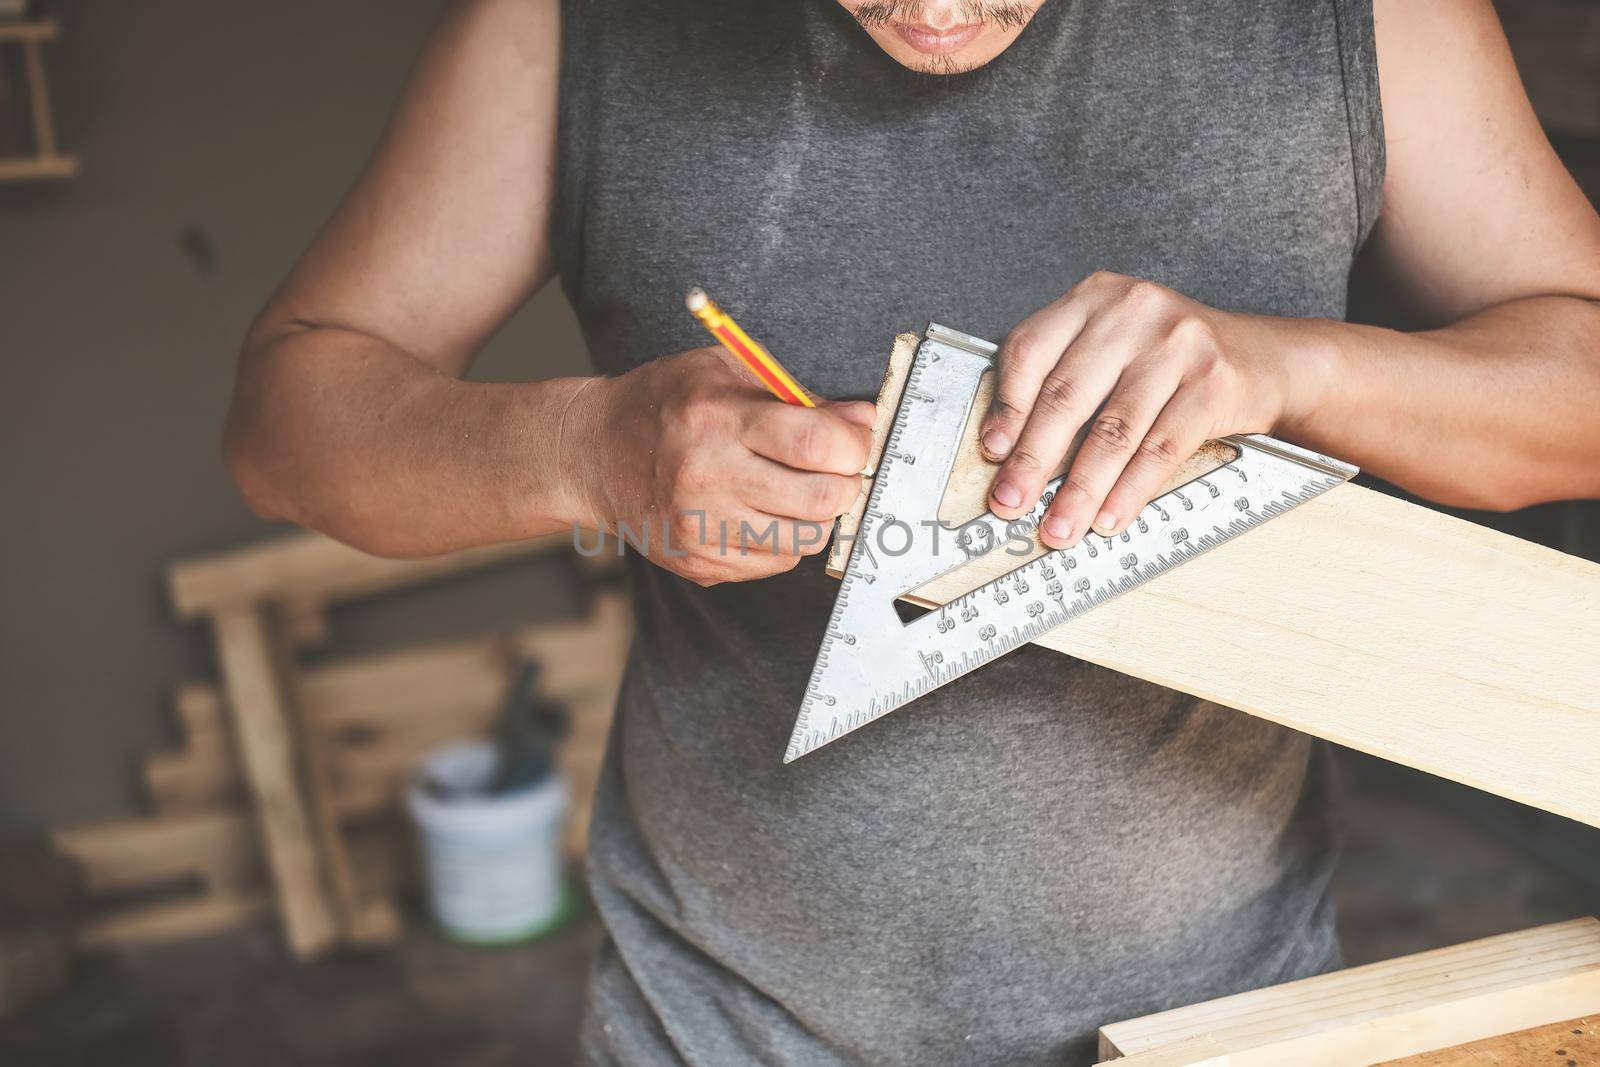 A carpenter measures the plates to assemble the parts. and build a wooden table for customers